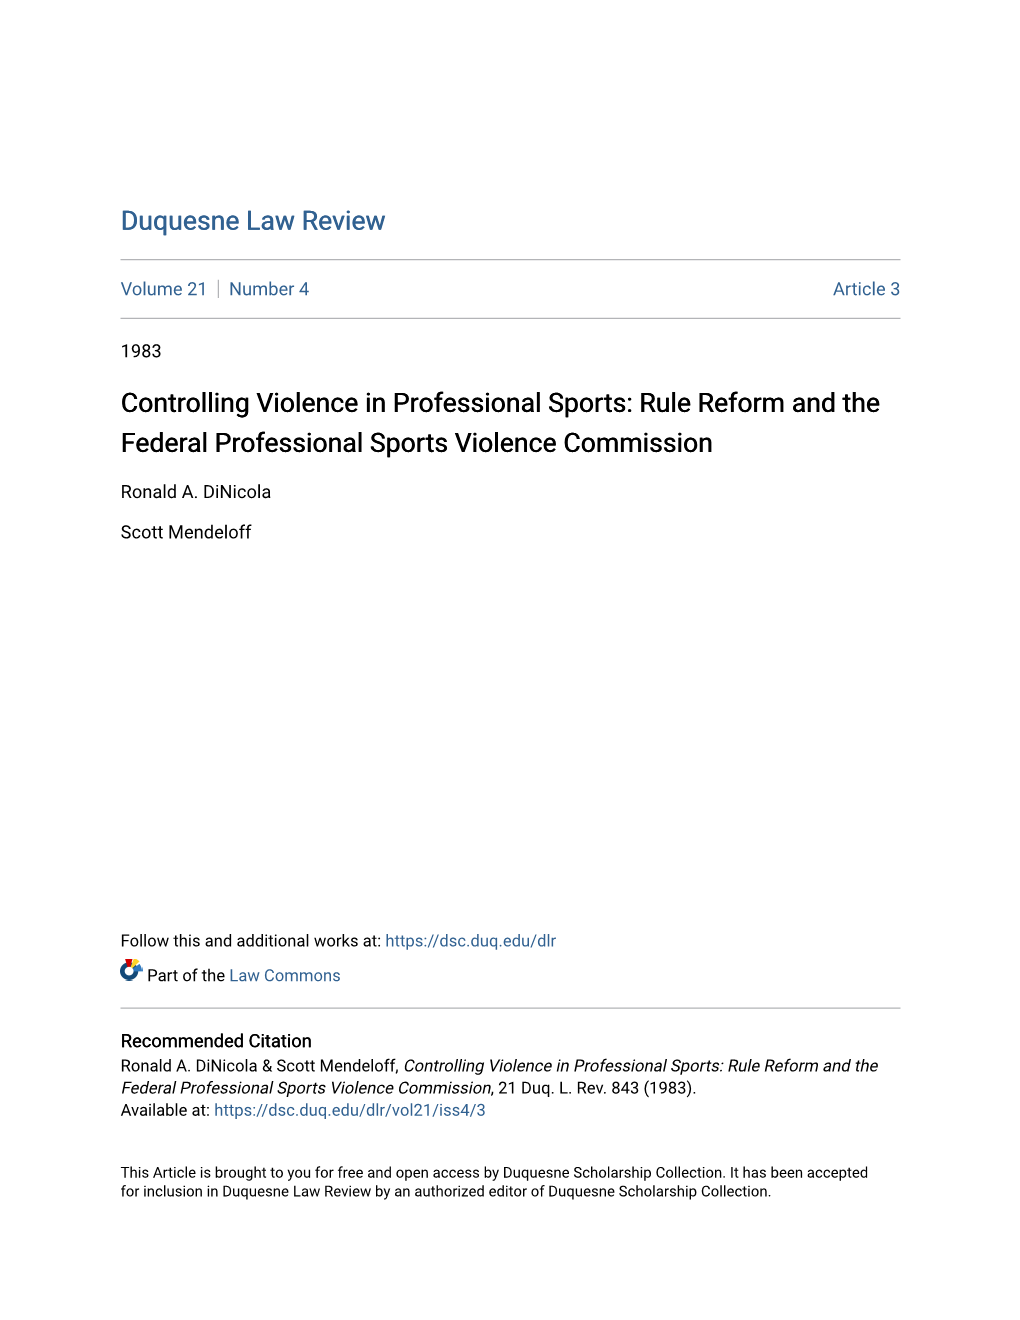 Controlling Violence in Professional Sports: Rule Reform and the Federal Professional Sports Violence Commission